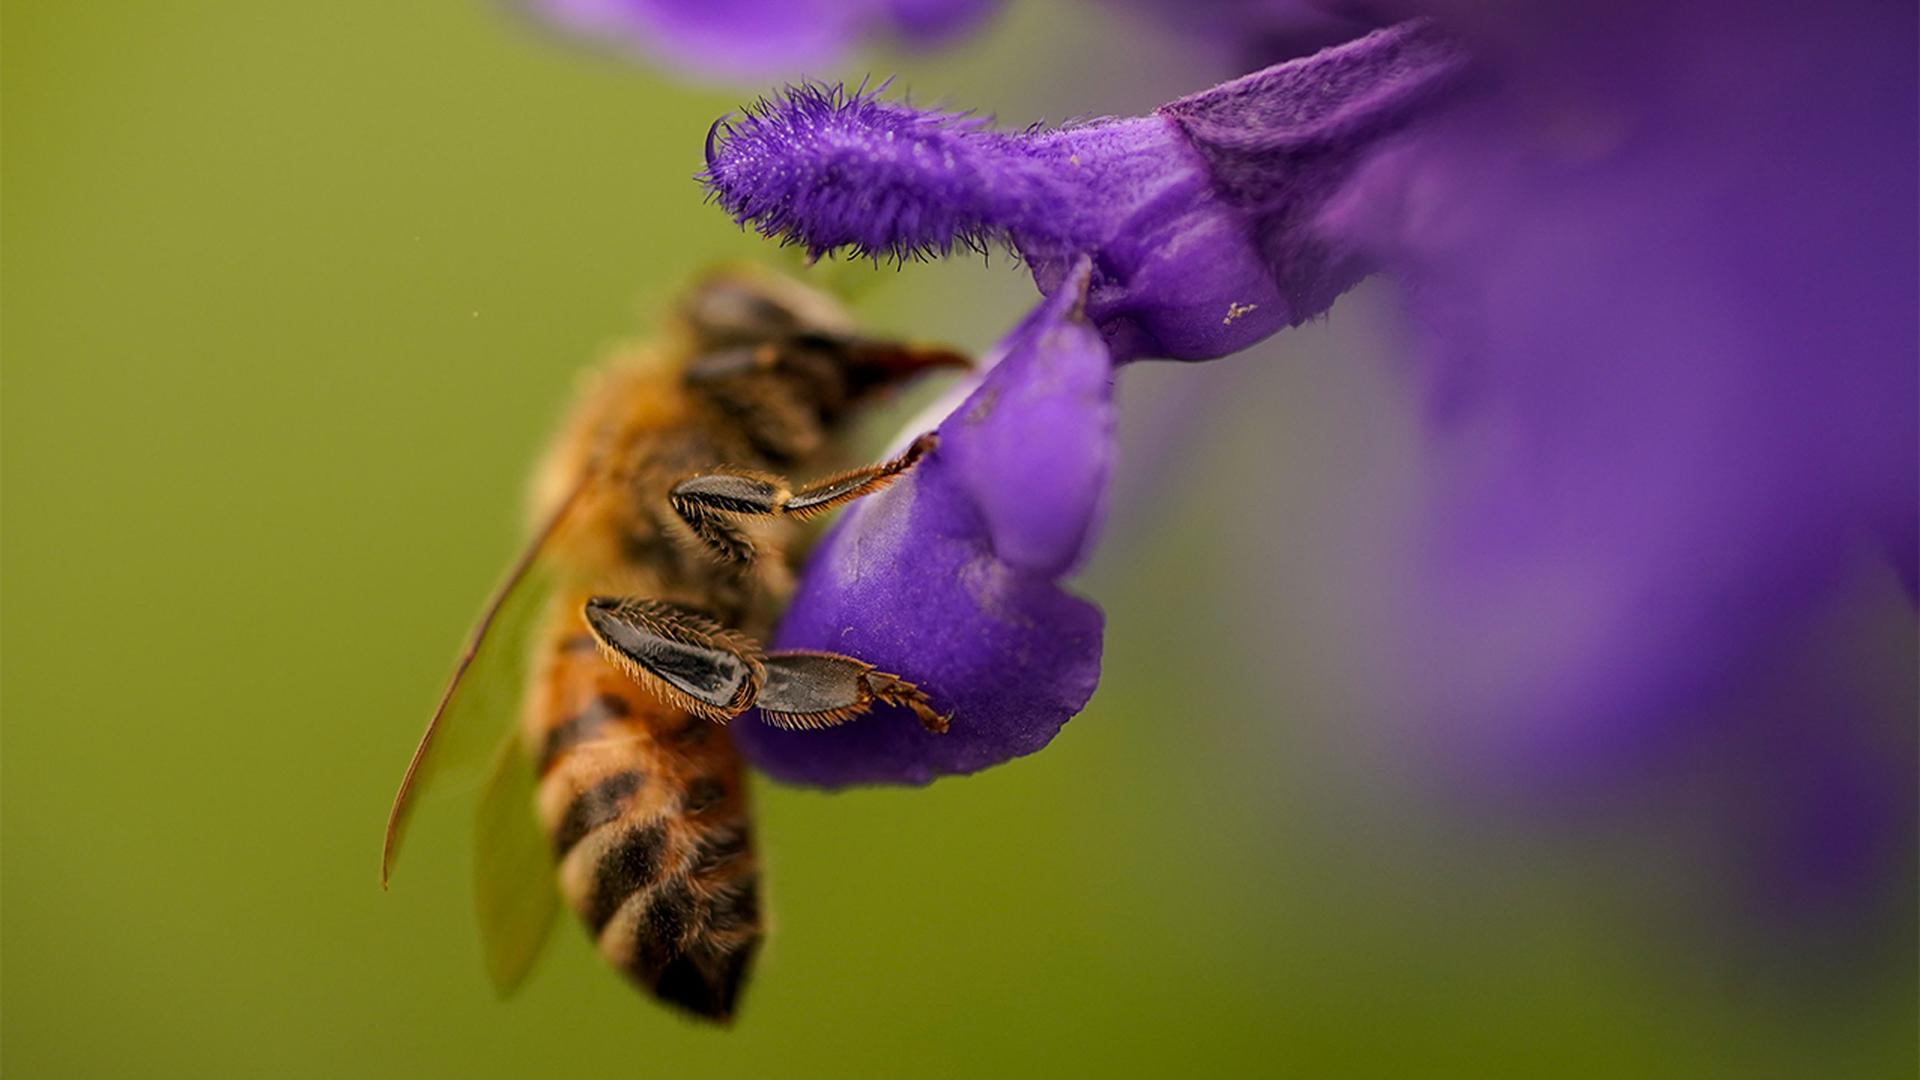 The hind legs or 'pollen basket' of a pollinating bee clings to a Salvia 'Mystic Spires Blue' sage flower at the United States Botanic Garden in Washington